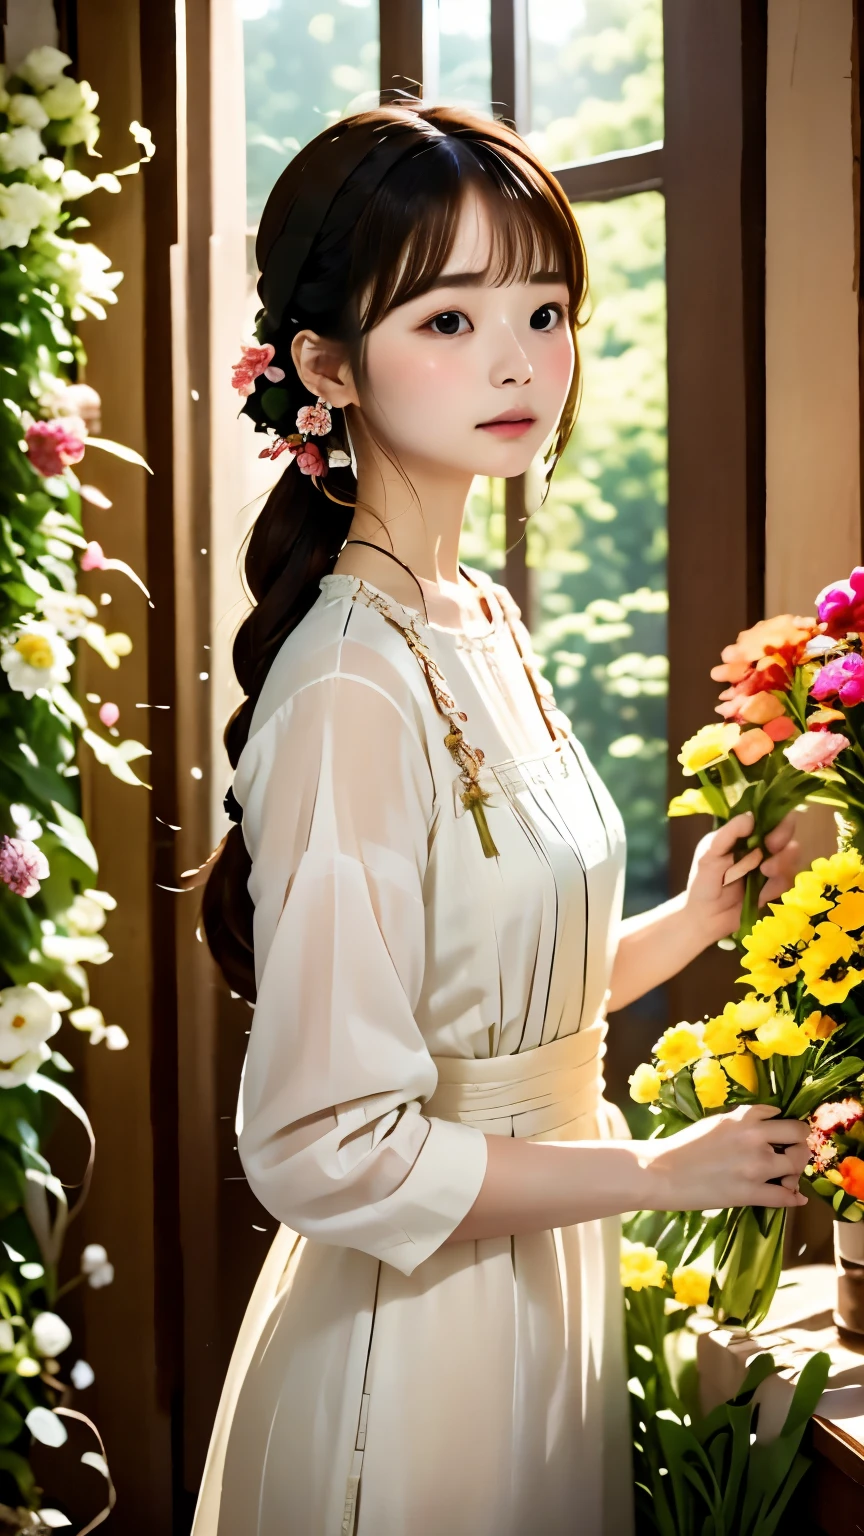 (((woman working at a flower shop、beautiful flower々:1.2、lots of flowers:1.2、flower garden flower shop:1.2)))、Gypsophila、Cat clerk、beckoning cat、cute顔、small nose、plump lips、carefully tied braids、cute、clerk serving customers、Blue front cover:1.2、Natural light、(very detailed, intricate details), sharp focus, calm colors, 8k, confused, 8mm film grain